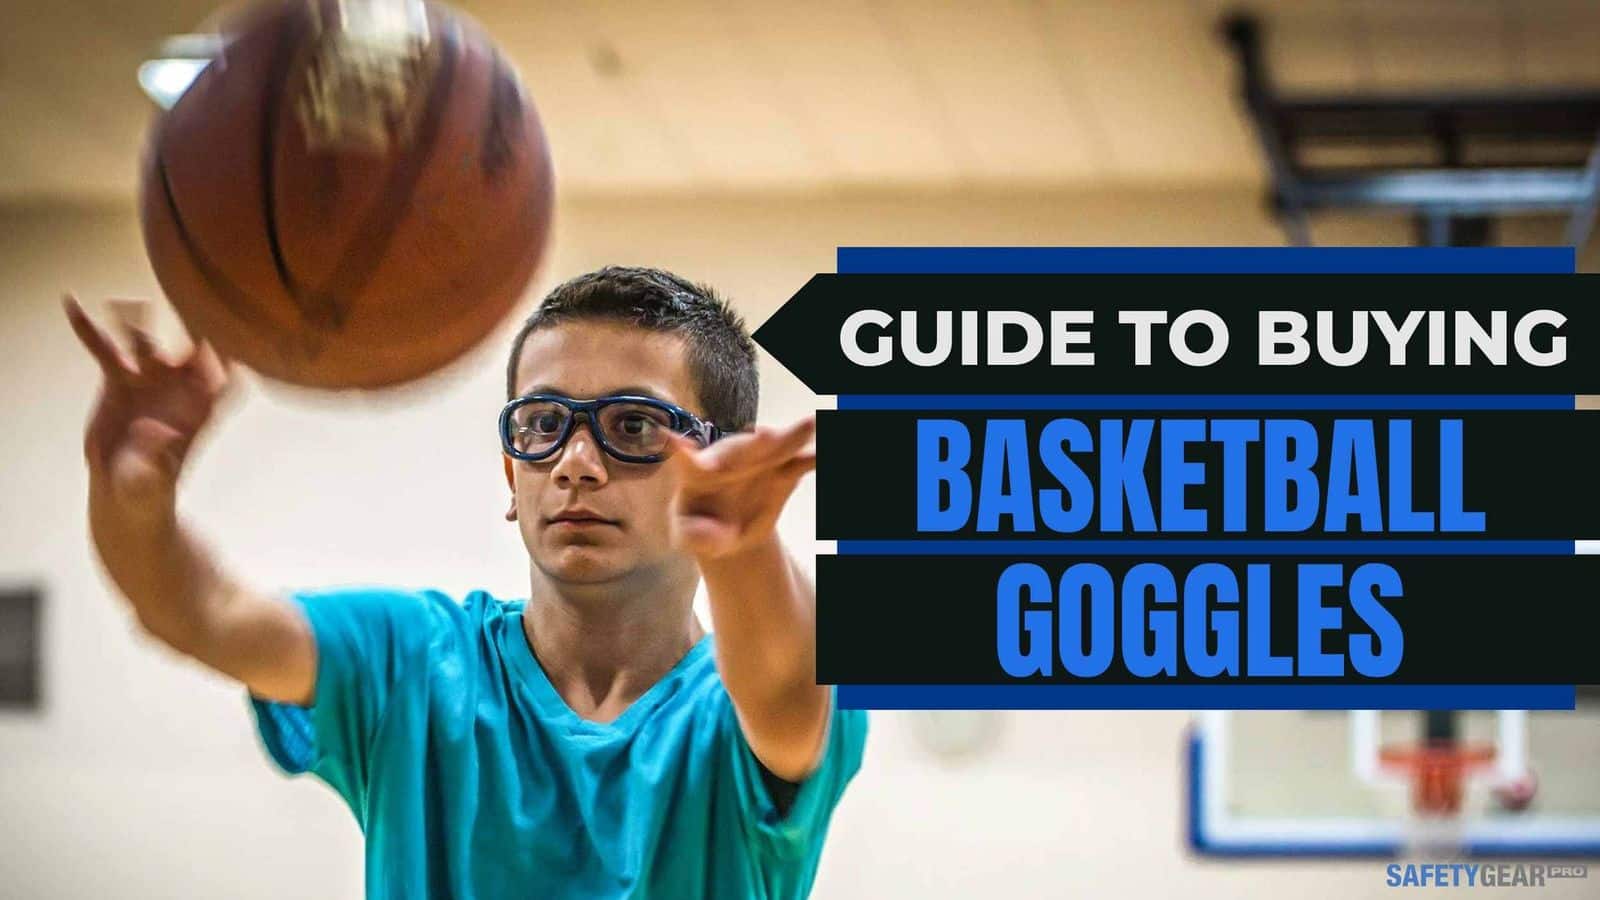 : Basketball Goggles Buying Guide Header